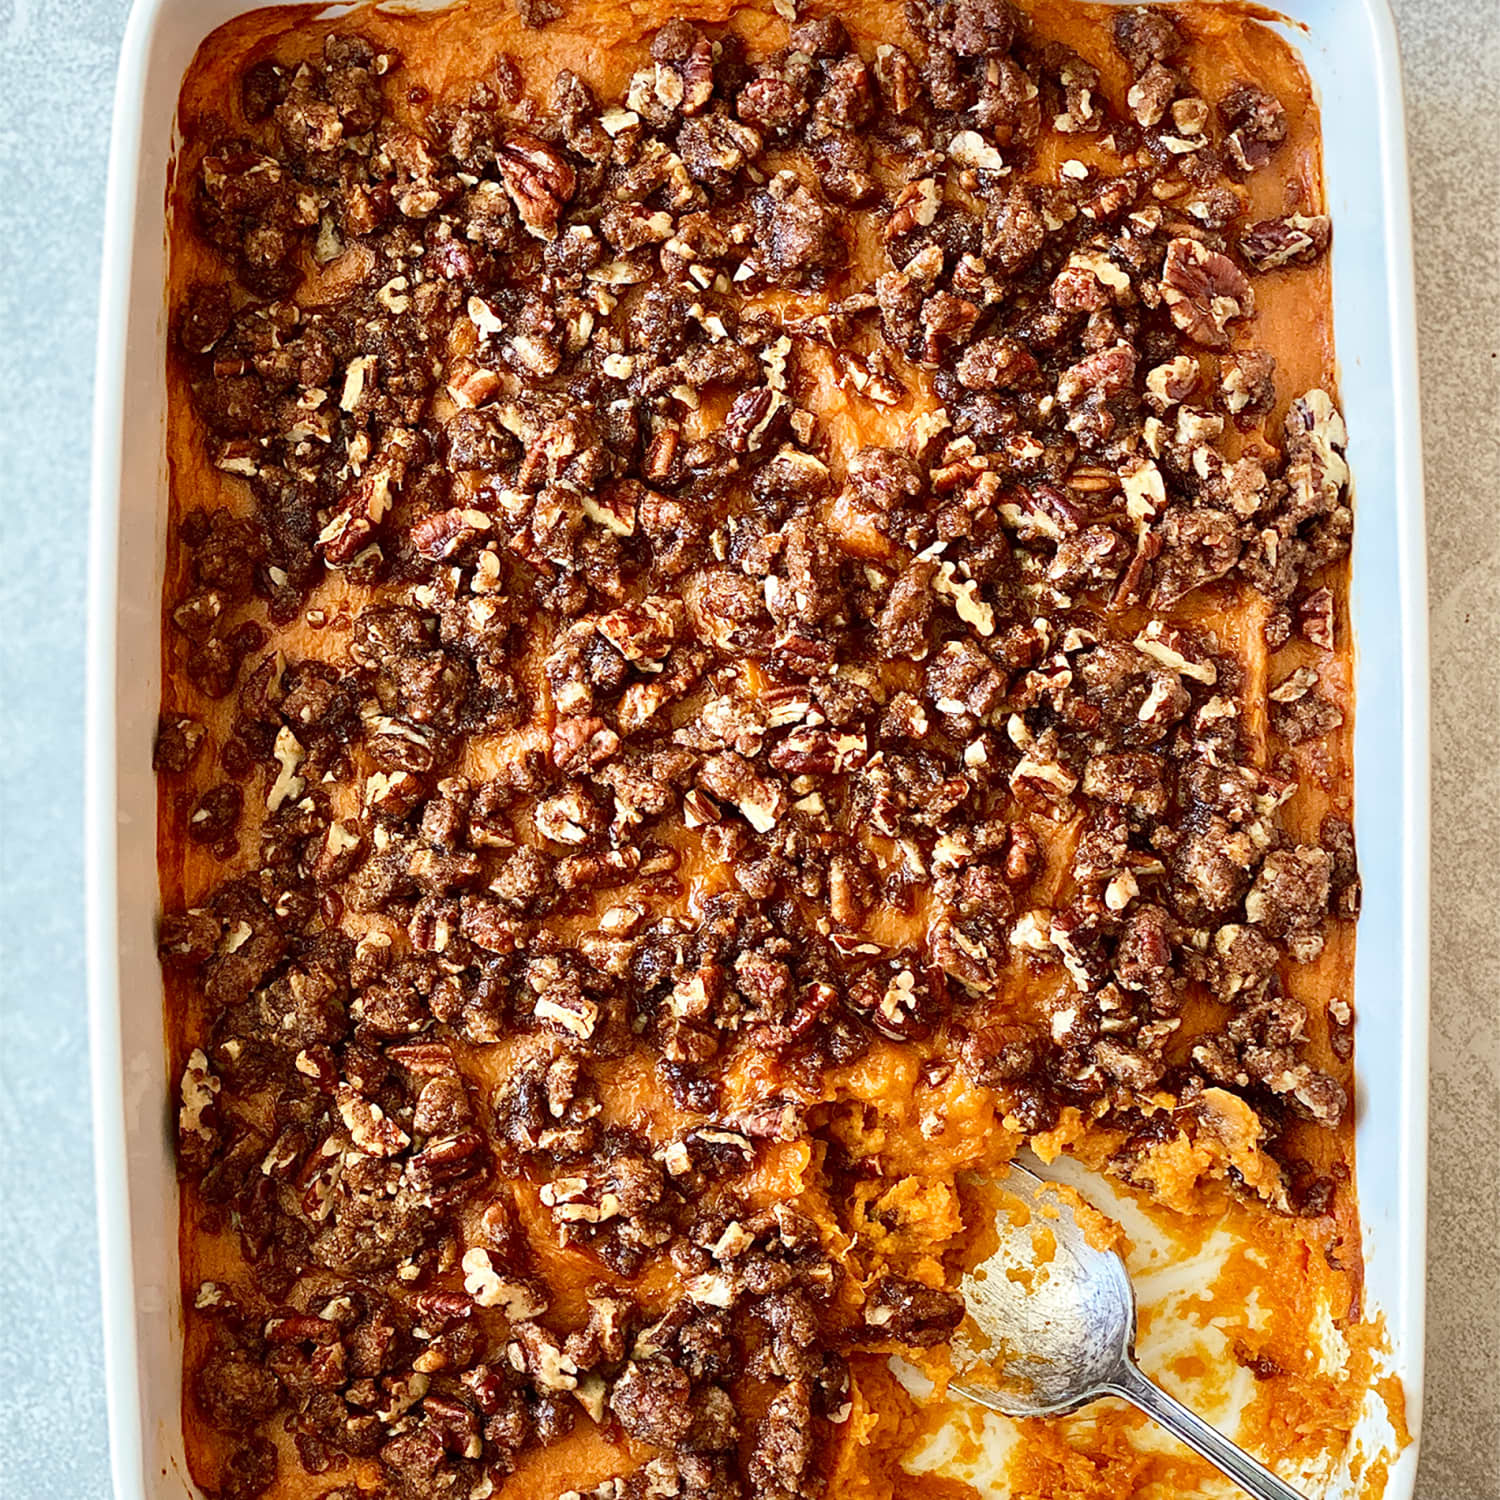 Our 10 Most Popular Casserole Recipes in October